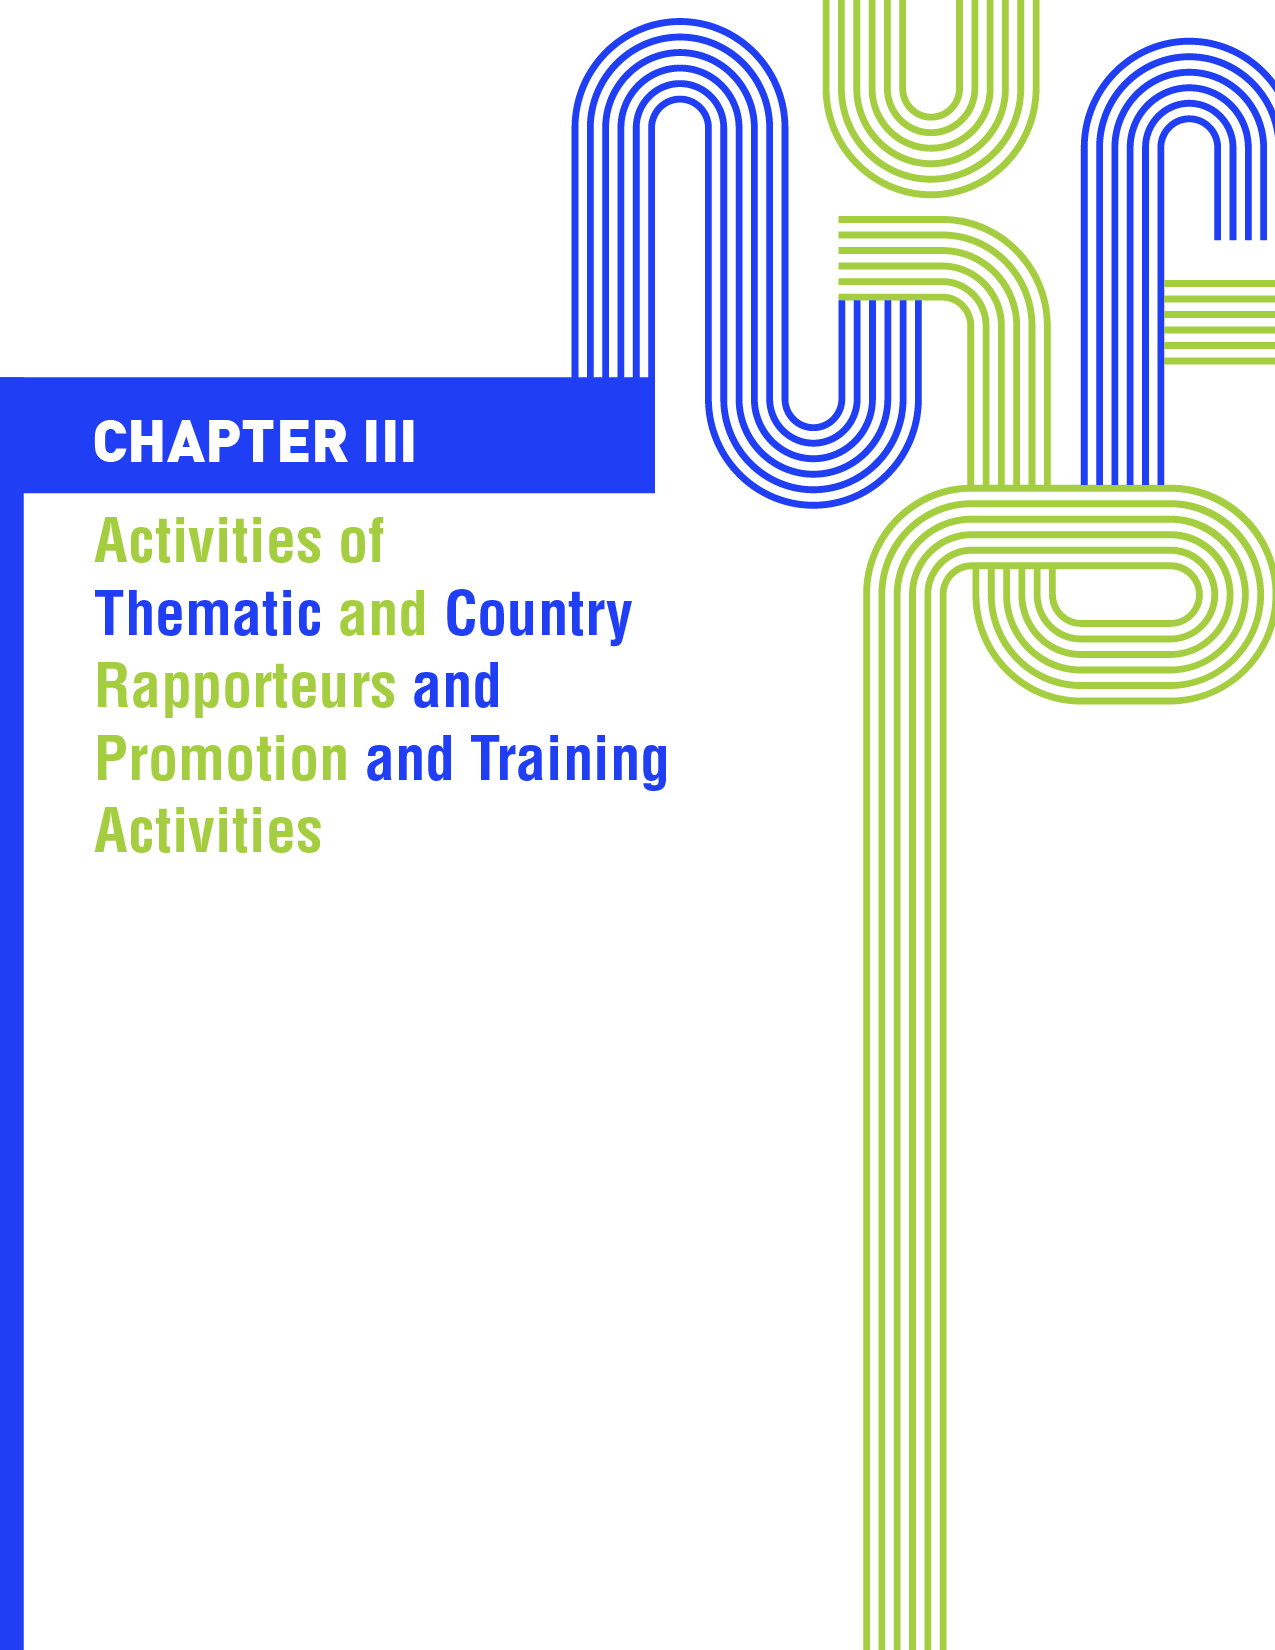 Activities of thematic and country rapporteurs and promotion and training activities